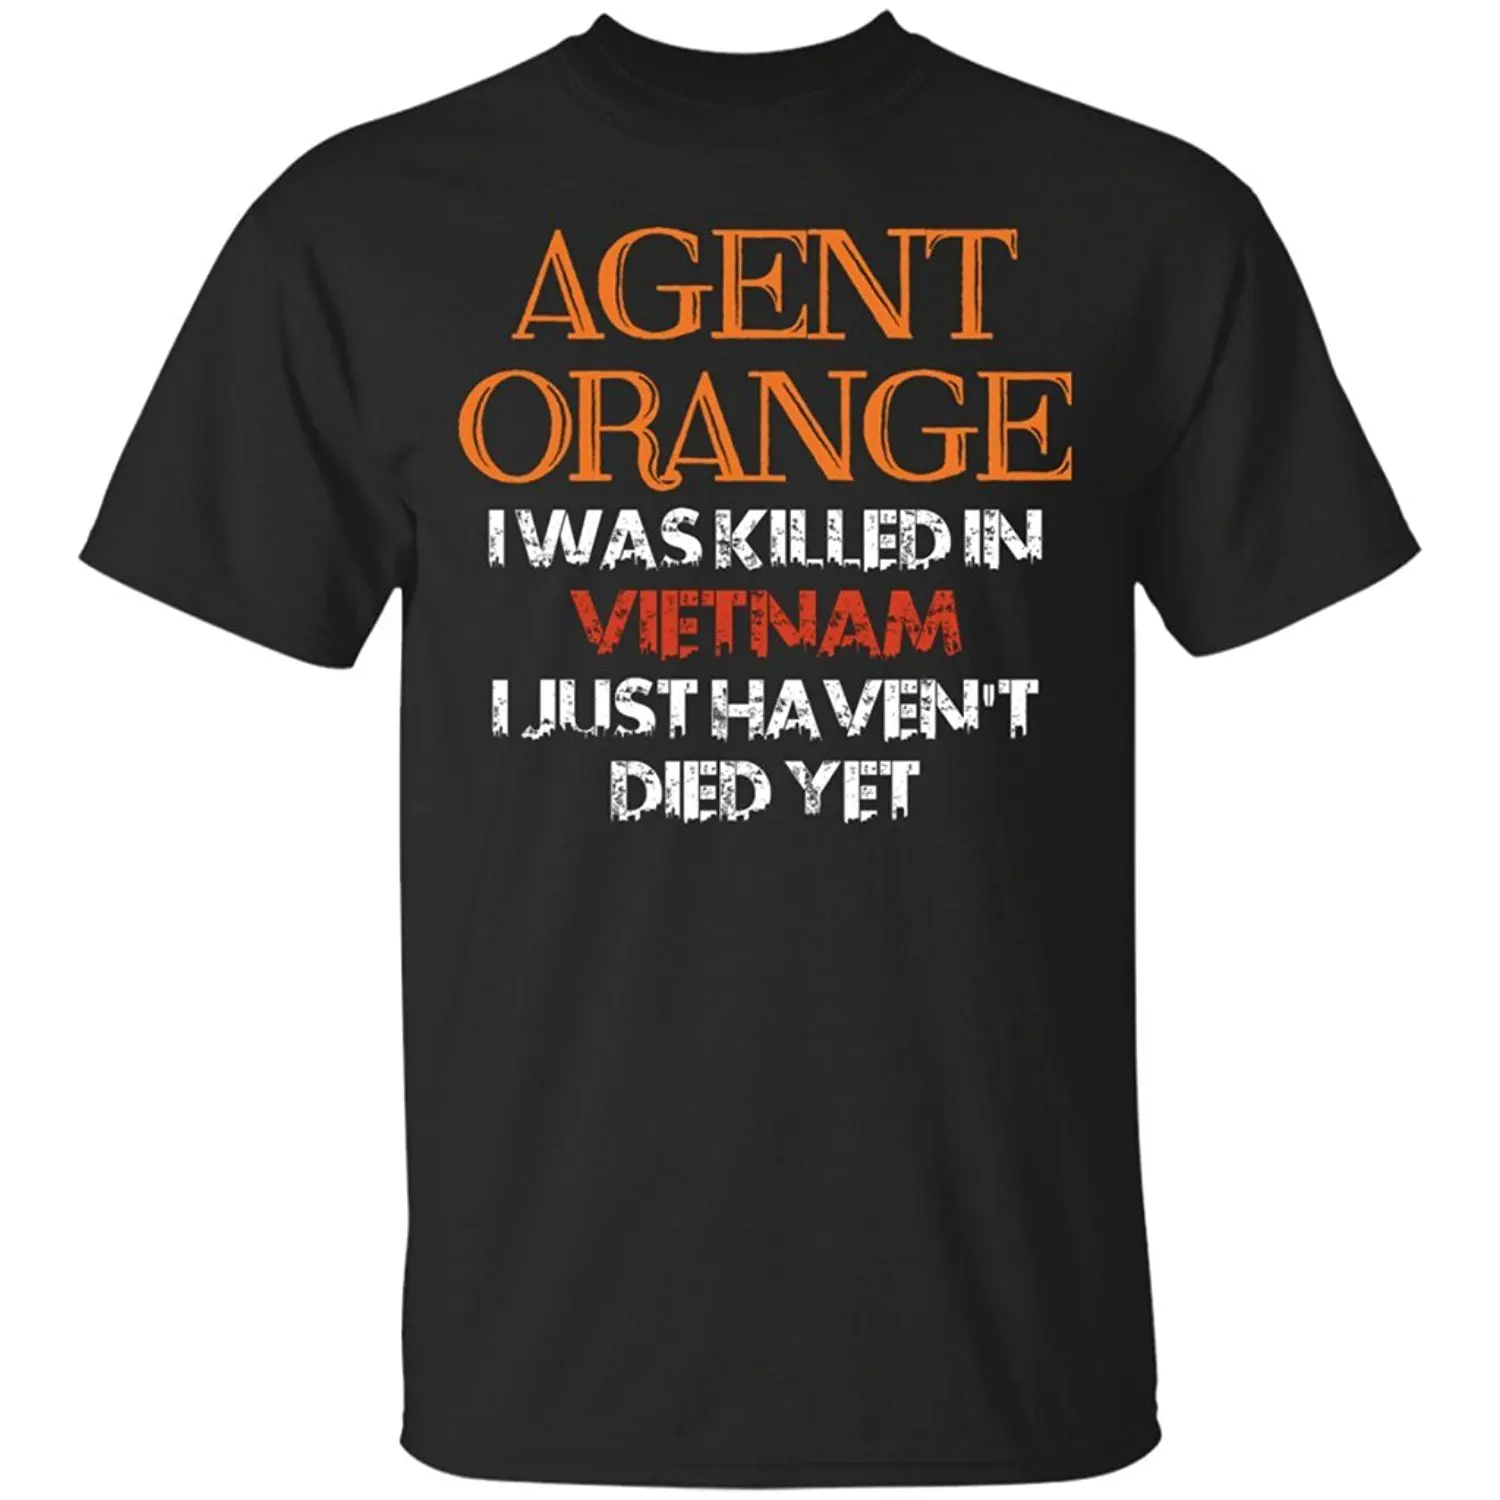 

Agent Orange I Was Killed In Vietnam I Just Haven't Died Yet T-Shirt Summer Cotton Short Sleeve O-Neck Men's T Shirt New S-3XL